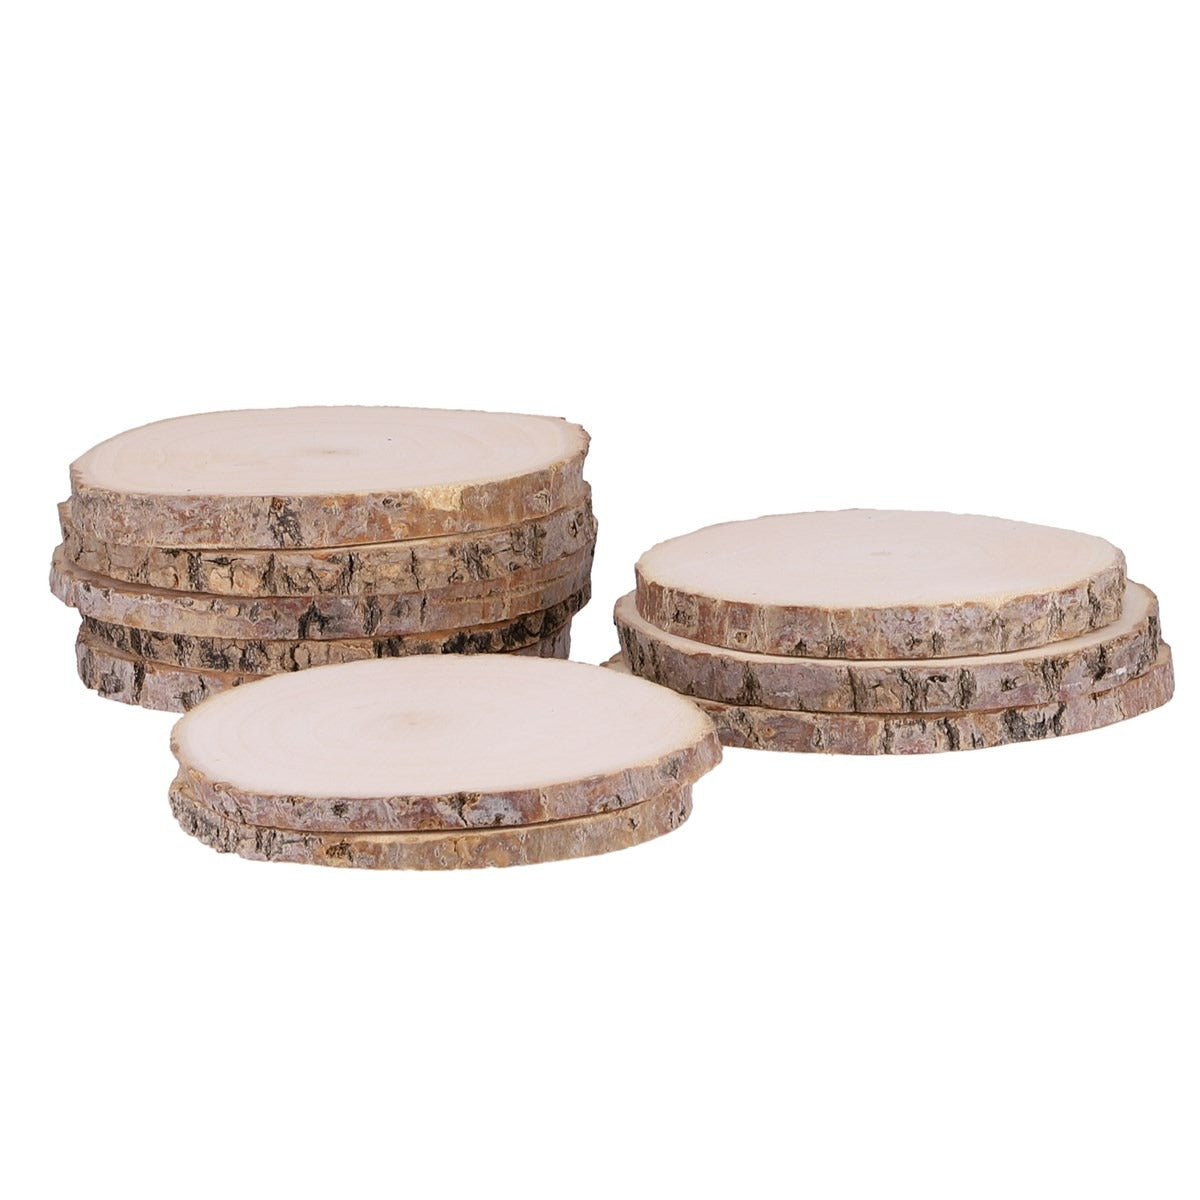 Large Tree Trunk Slices Pack of 10, This pack of Large Tree Trunk Slices is a great resource to allow children to explore different textures as they have a bark outer. The Large Tree Trunk Slices Pack of 10 can also be used for construction or loose parts play. Alternatively, you could write individual numbers, letters or phonemes to aid with number recognition, alphabet and phonics. Texture allows tactile and sensory exploration Develops creative and critical thinking skills 15cm Diameter These items are n